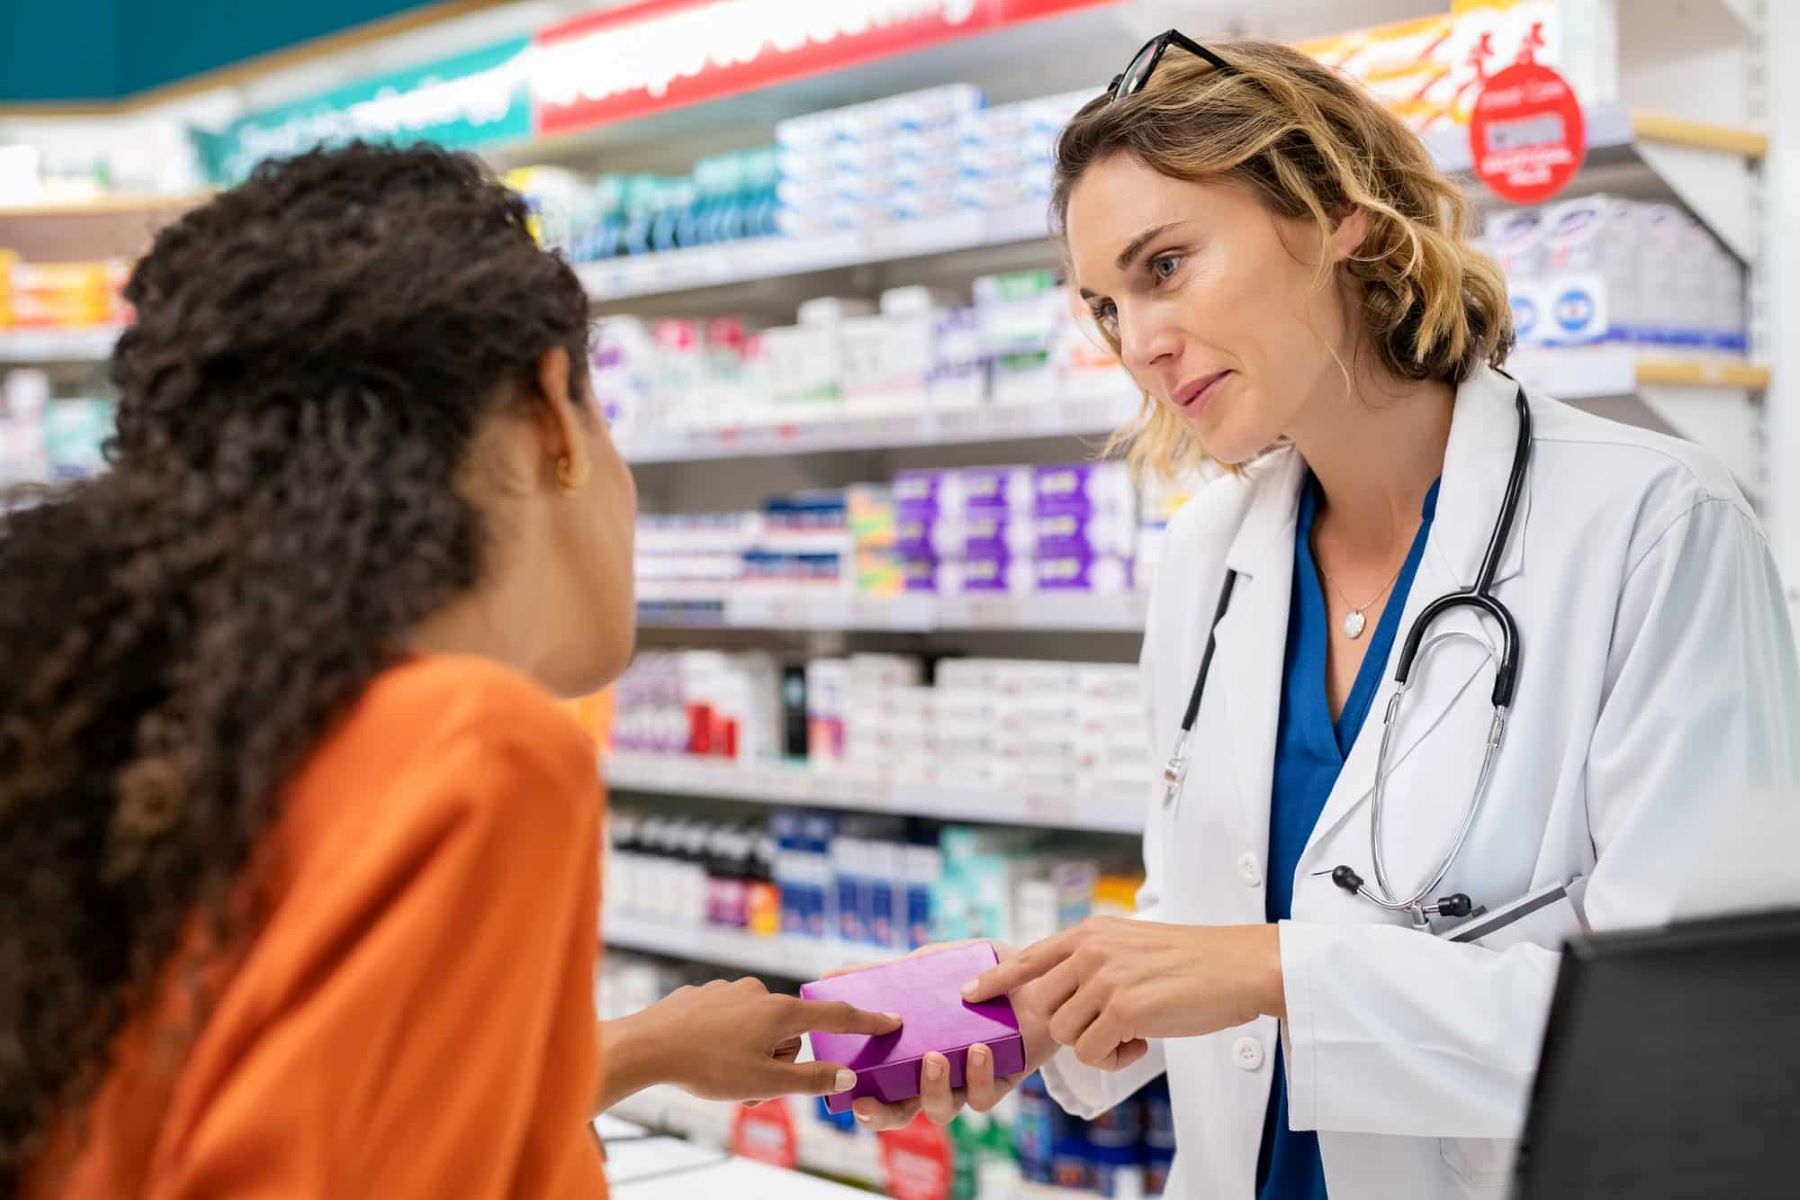 What Insurance Information Does A Pharmacy Need?